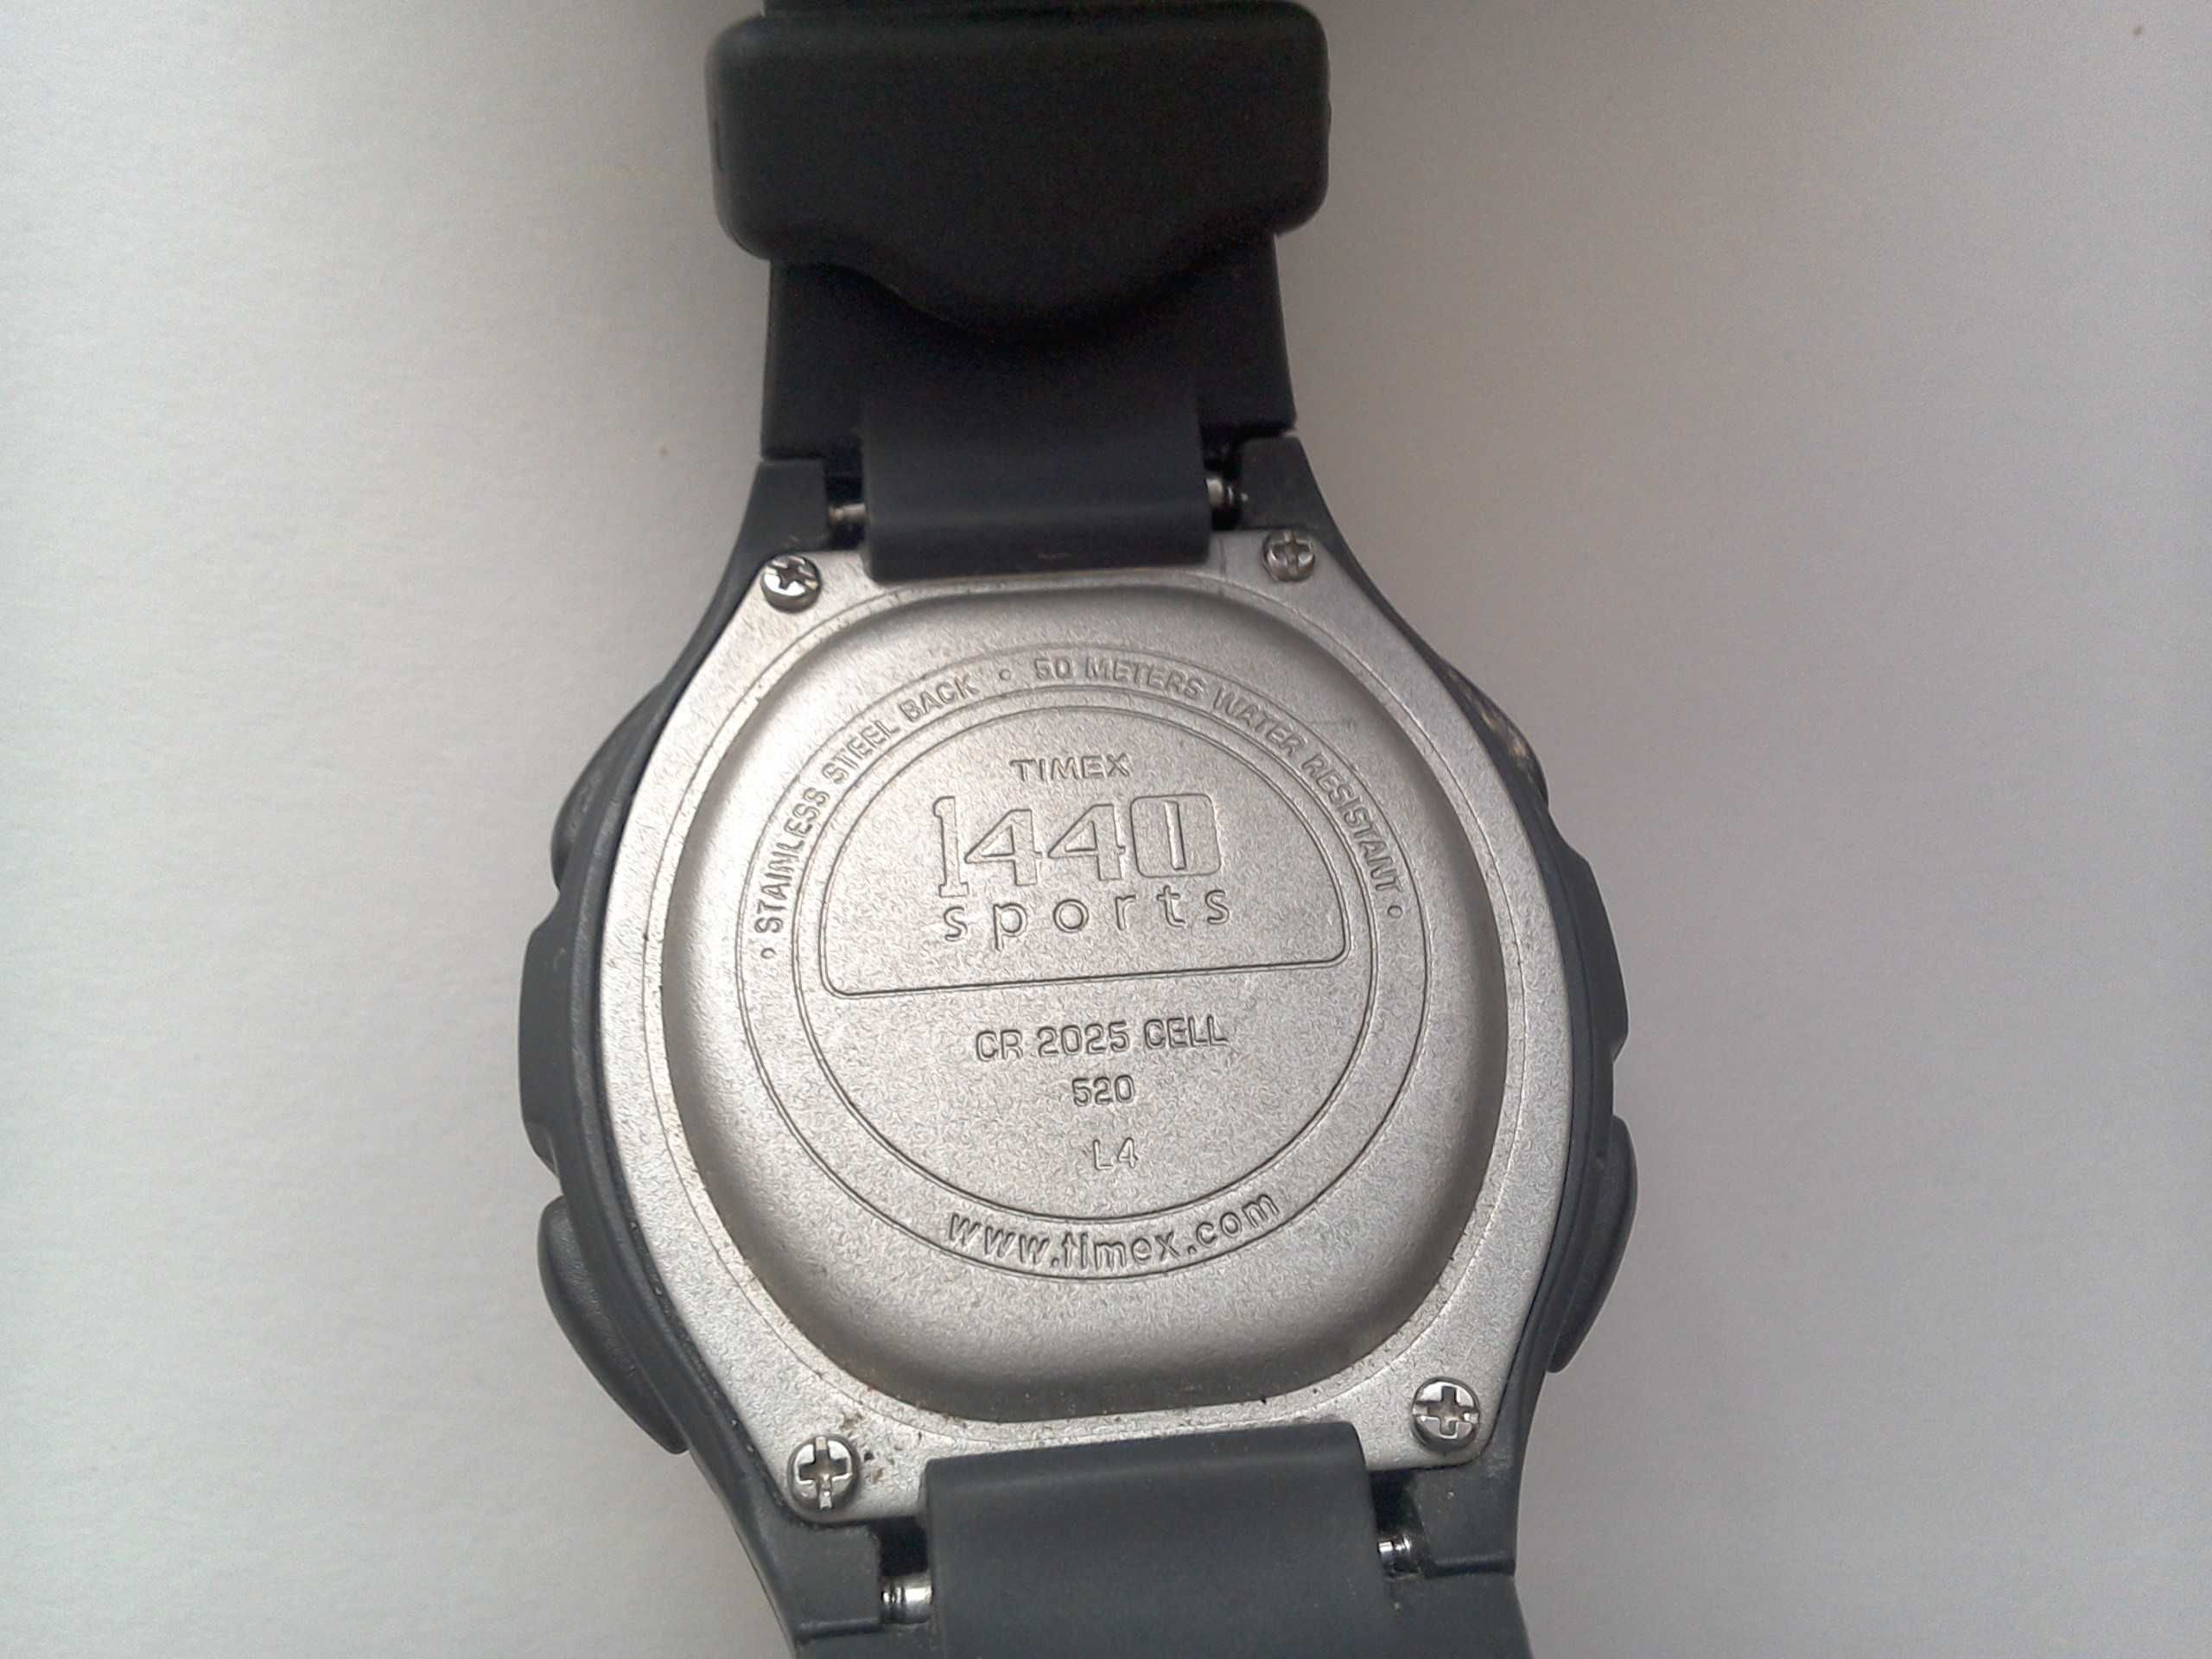 Ceas Timex 1440 - Sports, electronic - stare perfecta